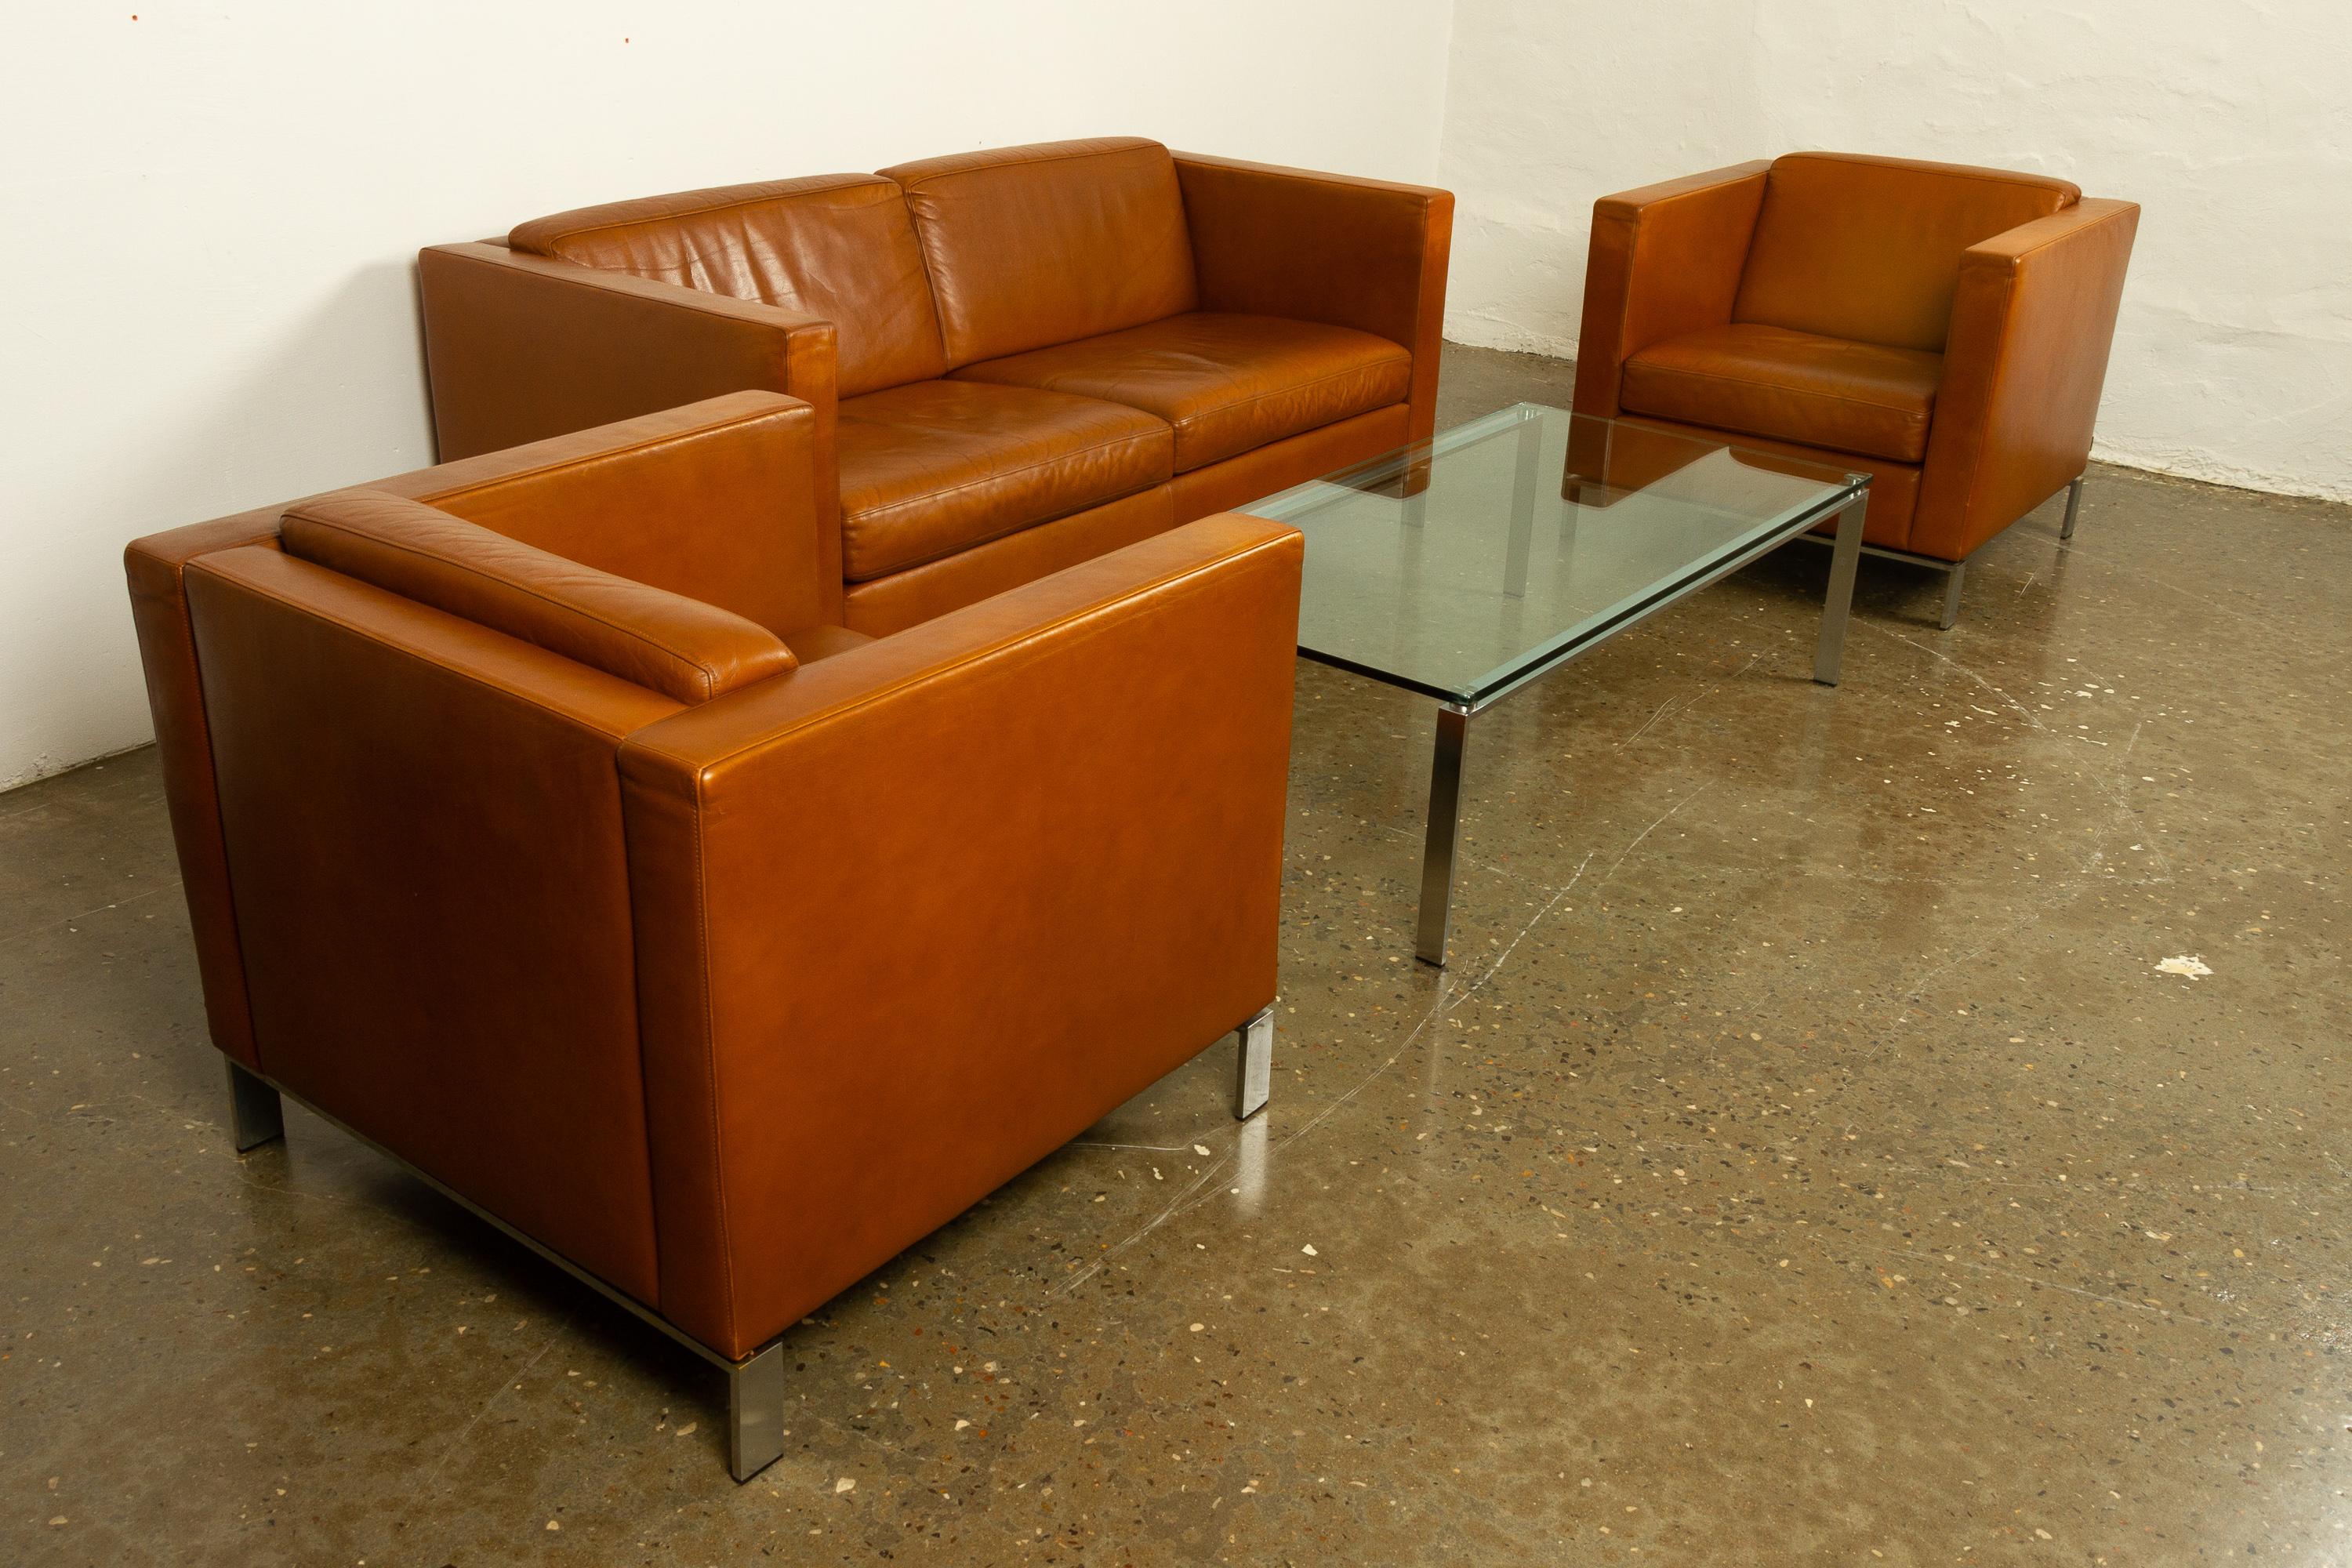 Norman Foster living room set in tan leather for Walter Knoll 2000s
This set of model Foster 500 consists of:
- Two-seater sofa 82 x 175 x 72cm sh 43cm
- 2 x Club chairs 82 x 80 x 72 sh 43cm
- Coffee table 65 x 140 x 37.5cm

Very high quality